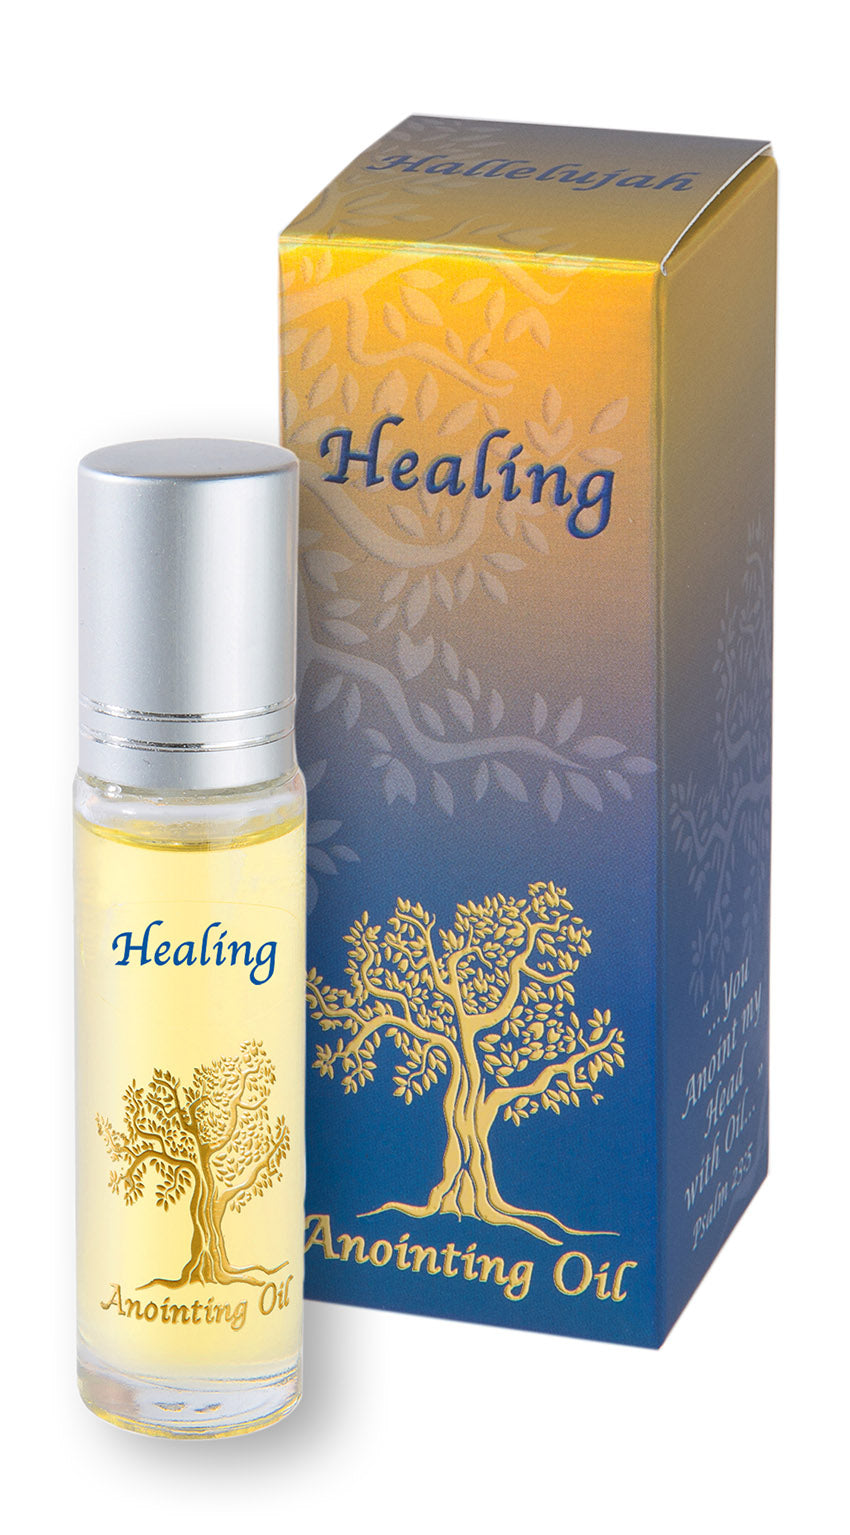 Anointing Oil - Healing